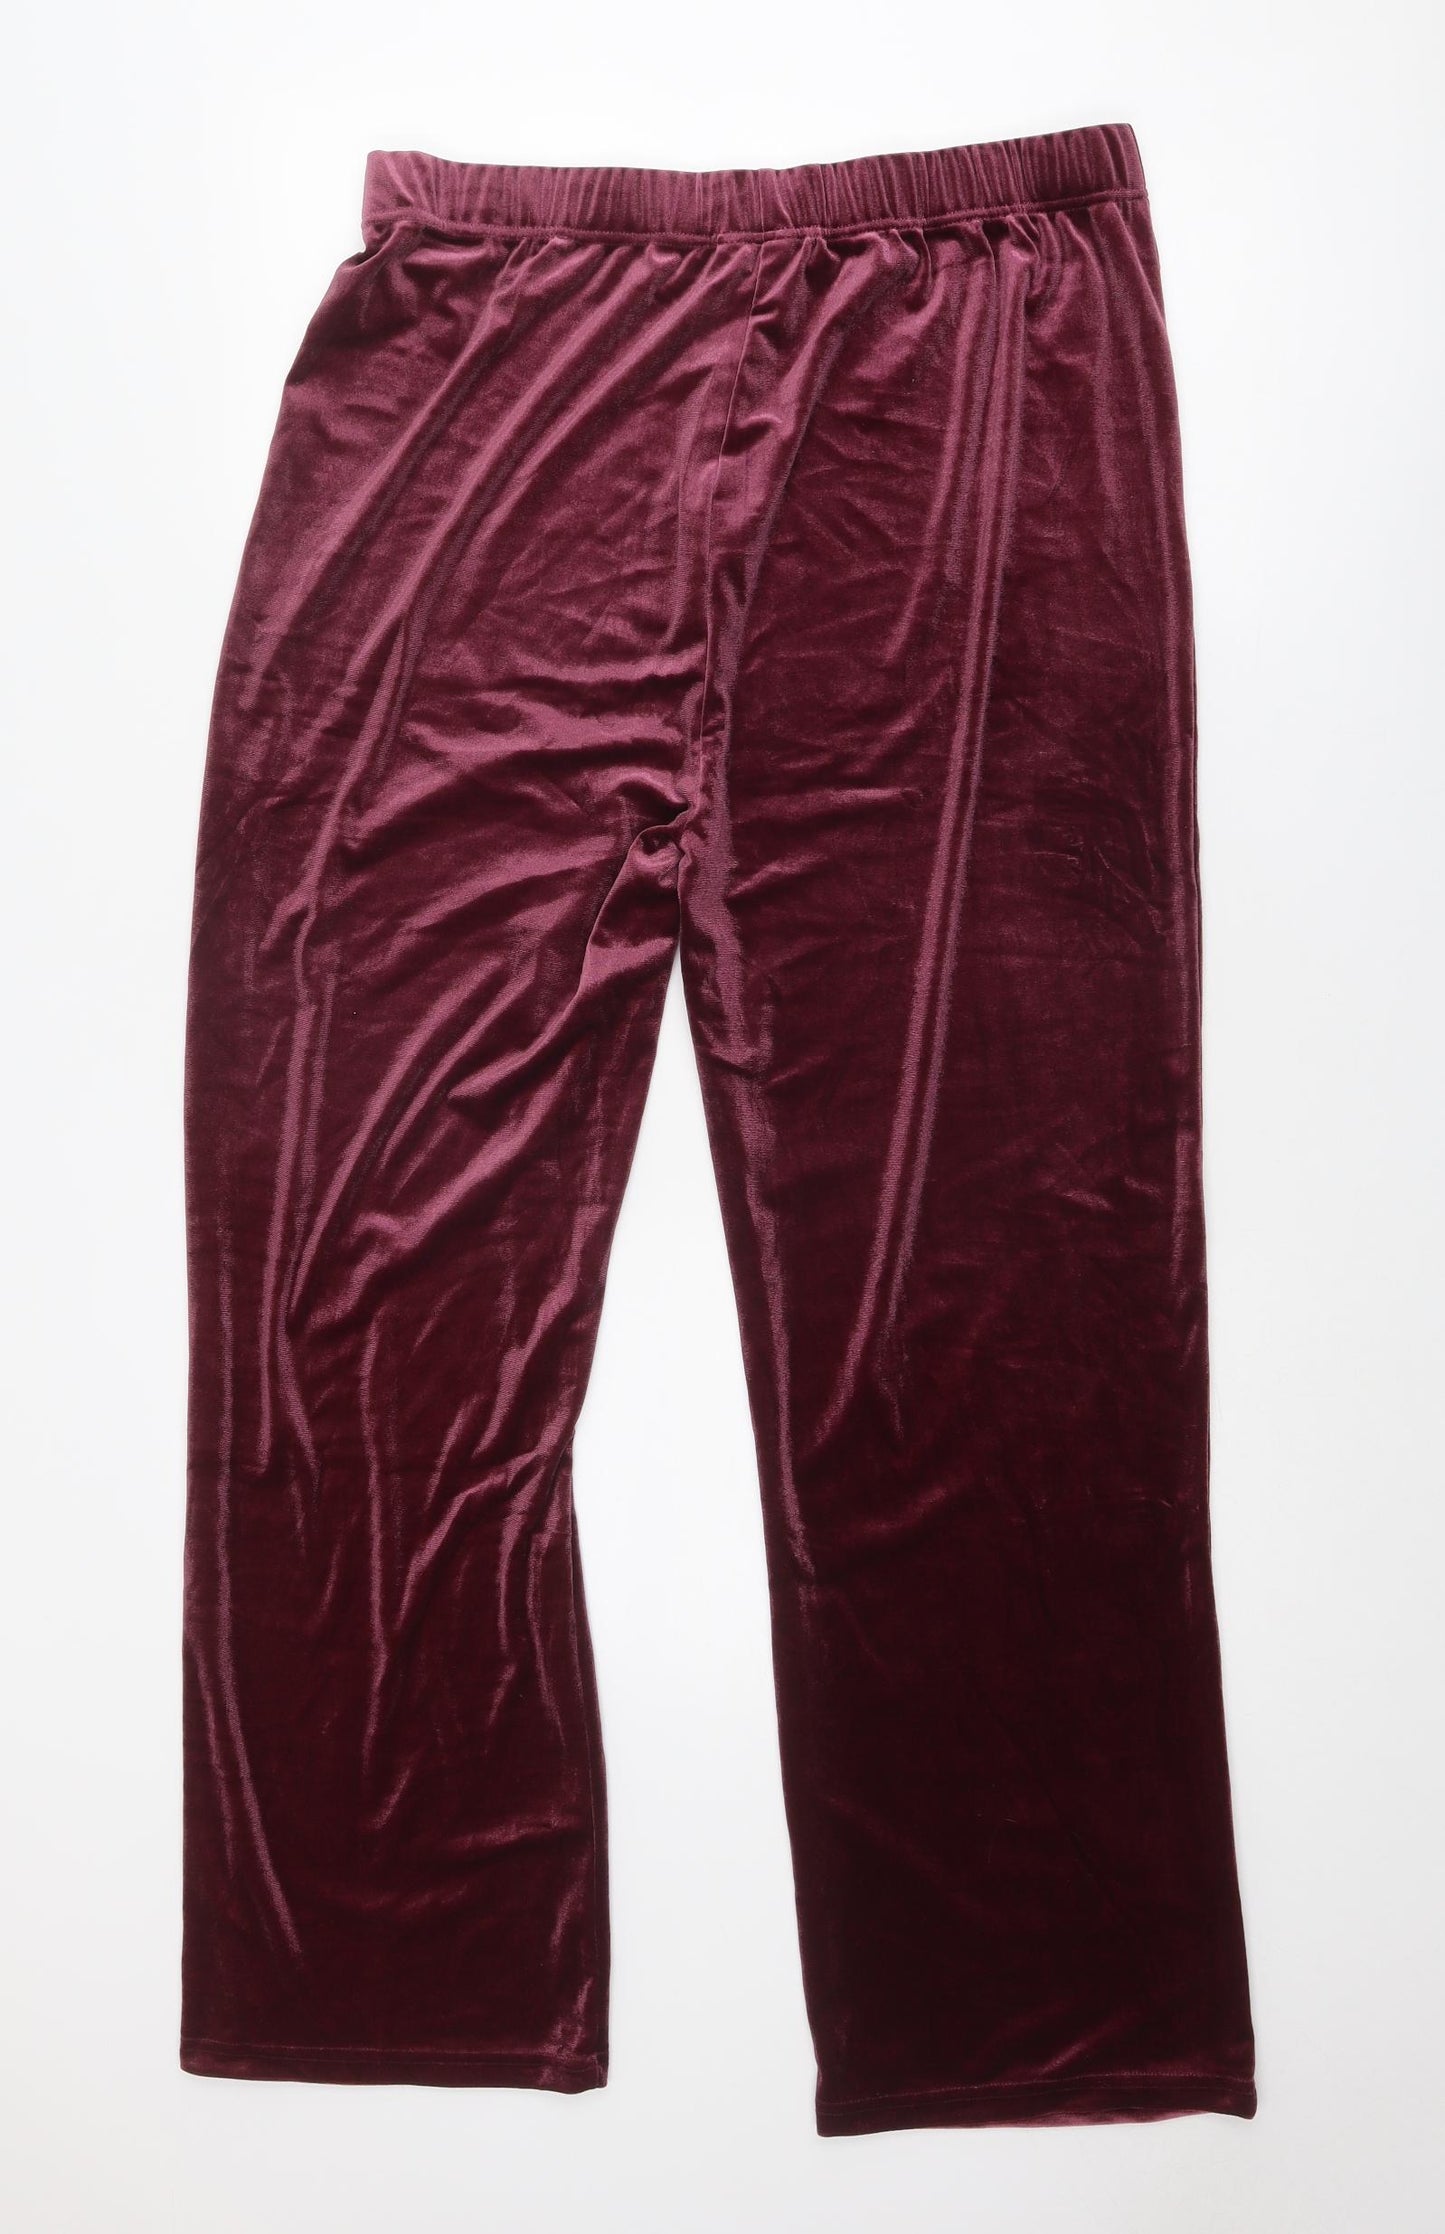 Cotton Traders Womens Purple Polyester Trousers Size 18 Regular